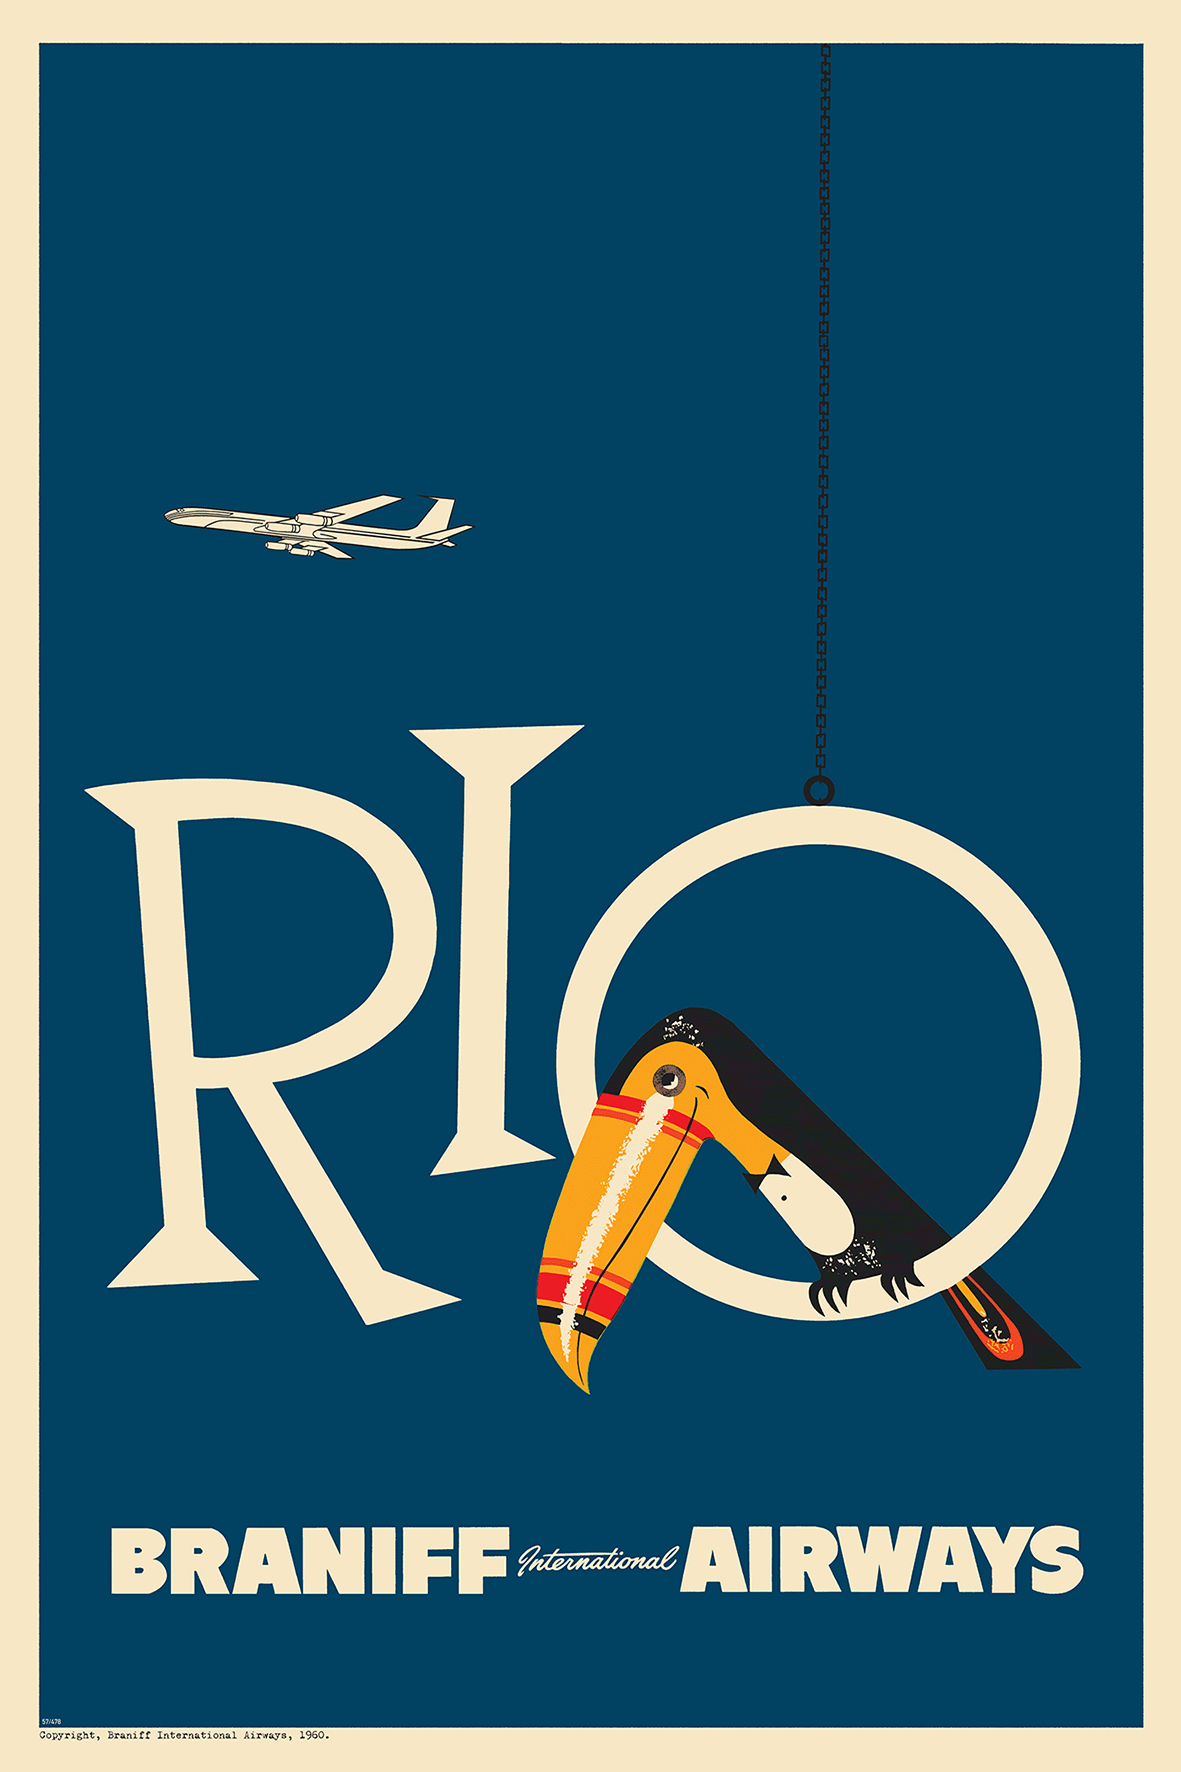 Braniff Rio Toucan Welcome to Brazil, 1959. (Olive)